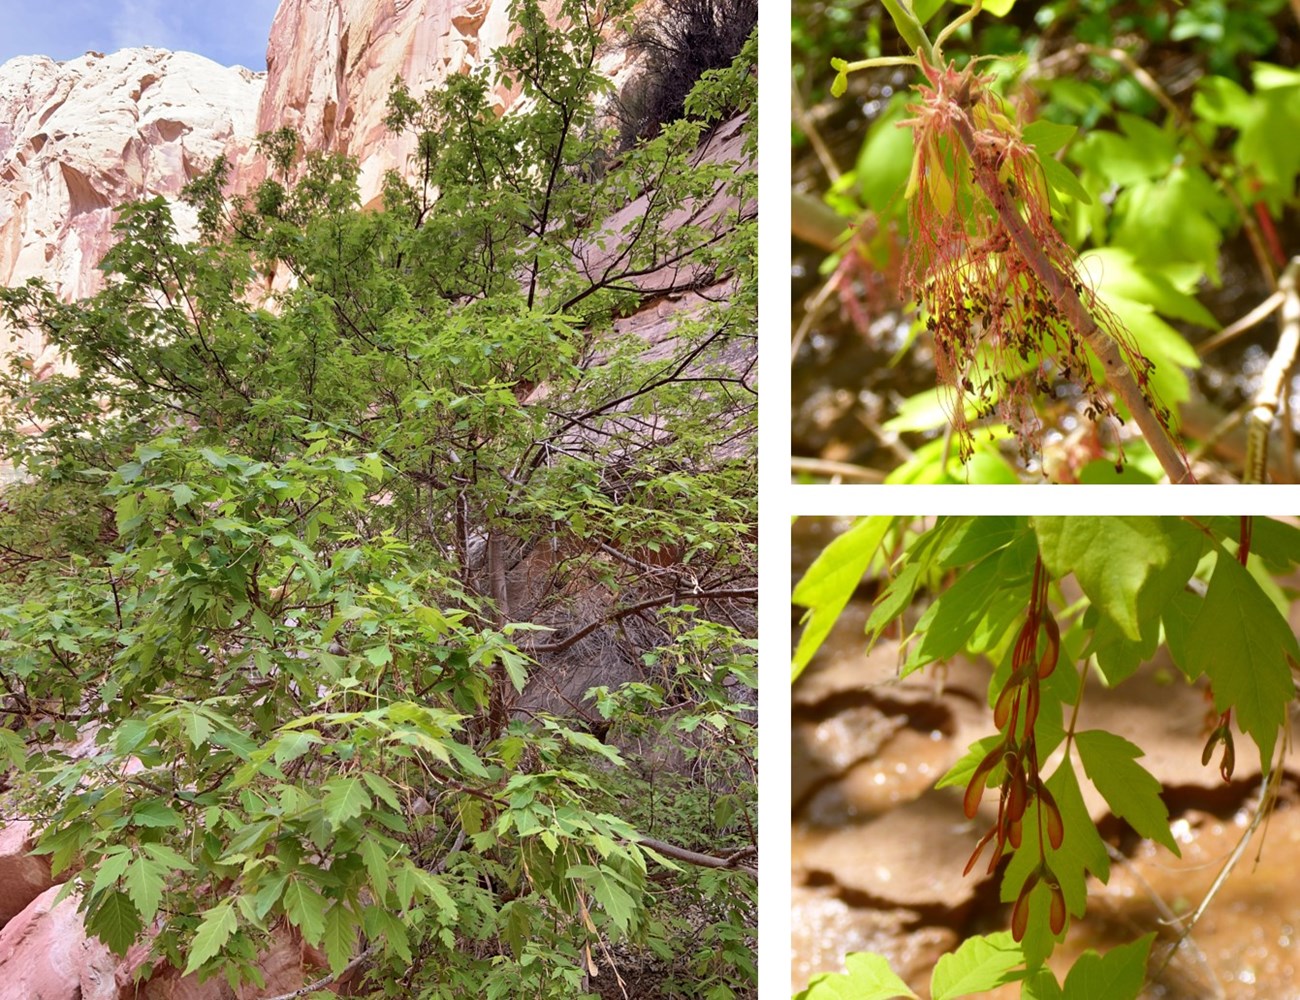 Three photos: large, leafy green tree in a canyon; close up of pink stringy lines coming from cluster, with small dark ends; and close up of bright green leaves with green, winged seeds.